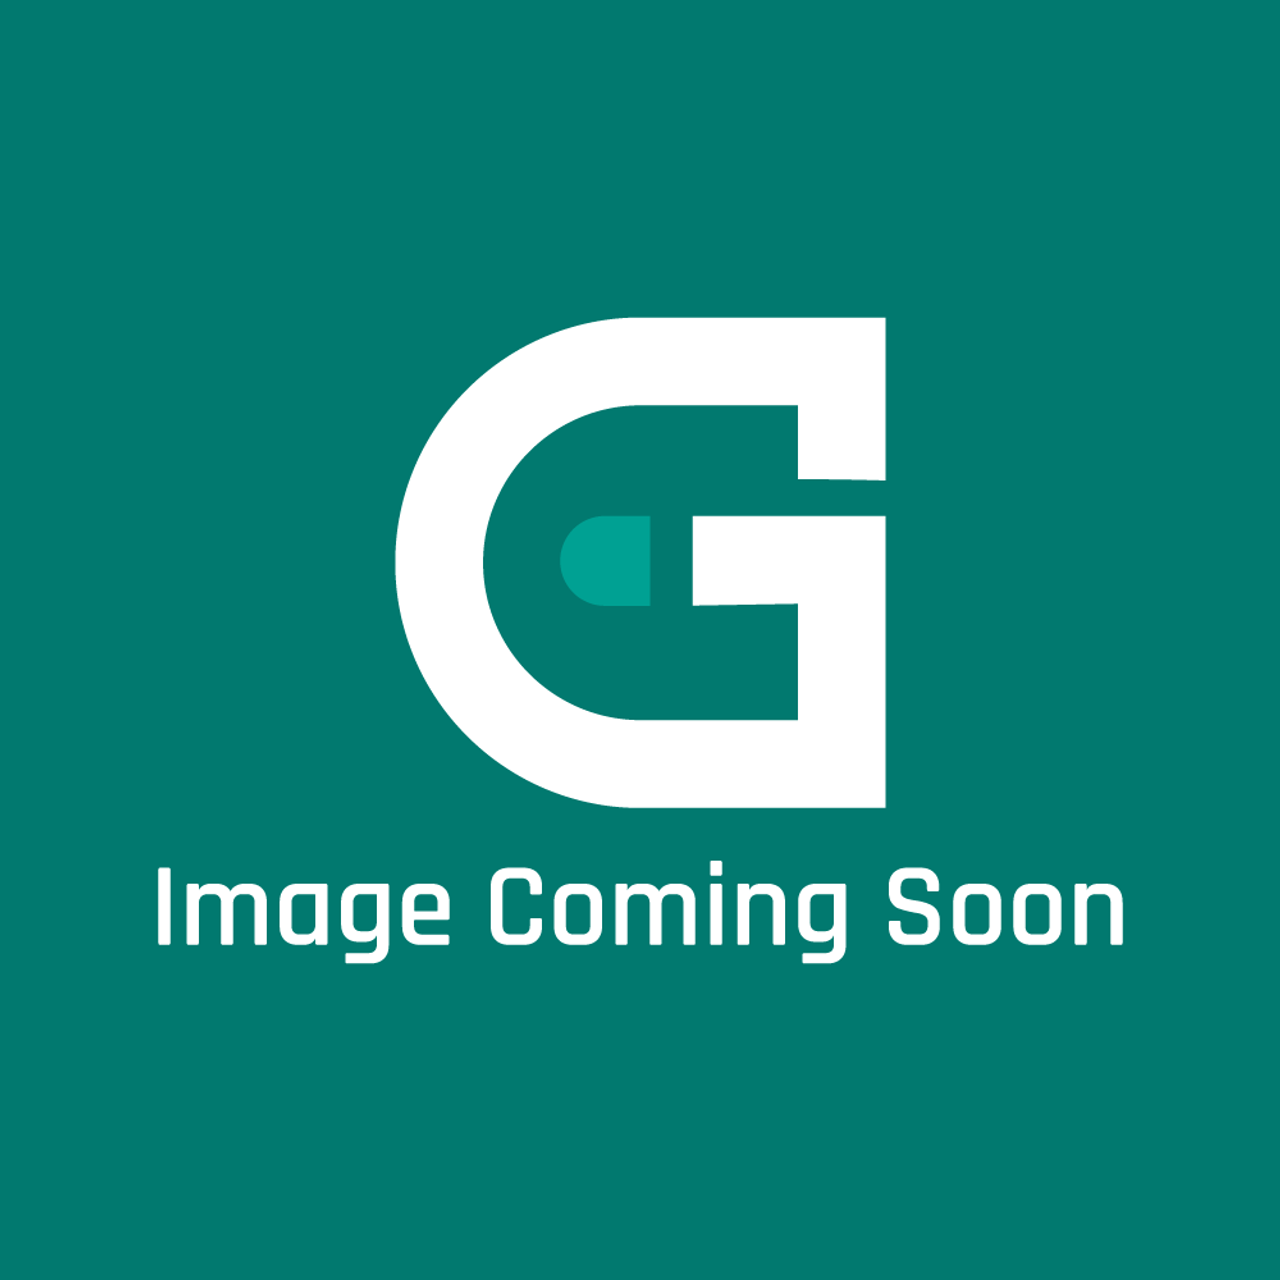 Garland 4523051 - Fire Plate Sunfire 20W S Td Ove - Image Coming Soon!